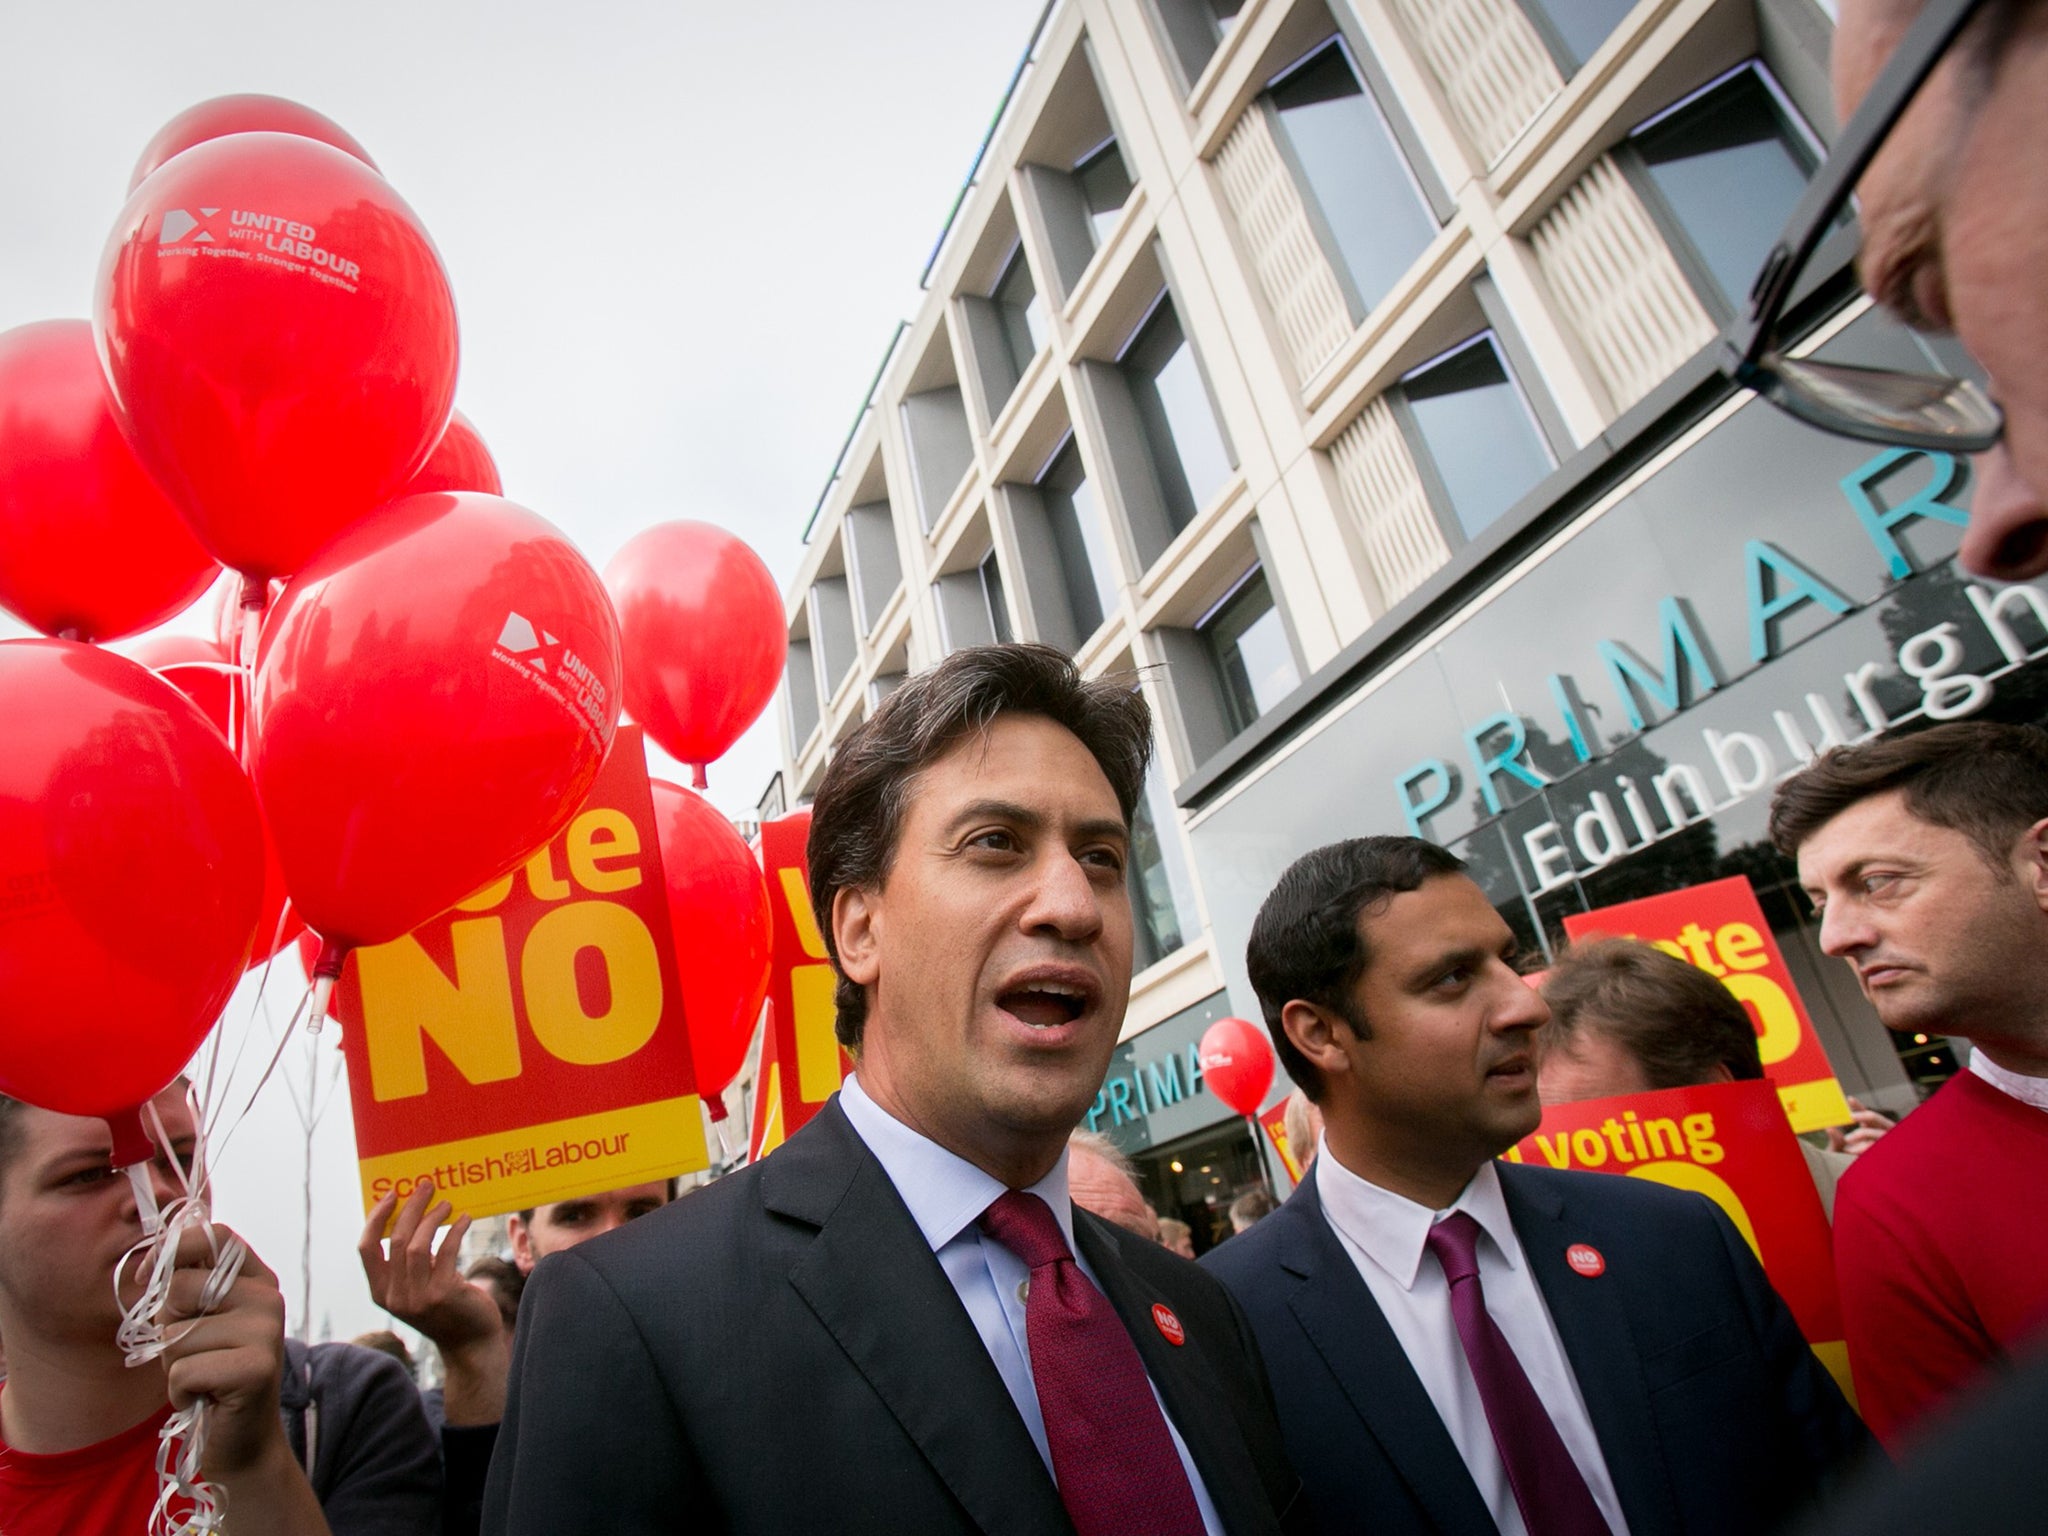 Leader of the Labour Party Ed Miliband speaks with supporters as he visits Edinburgh